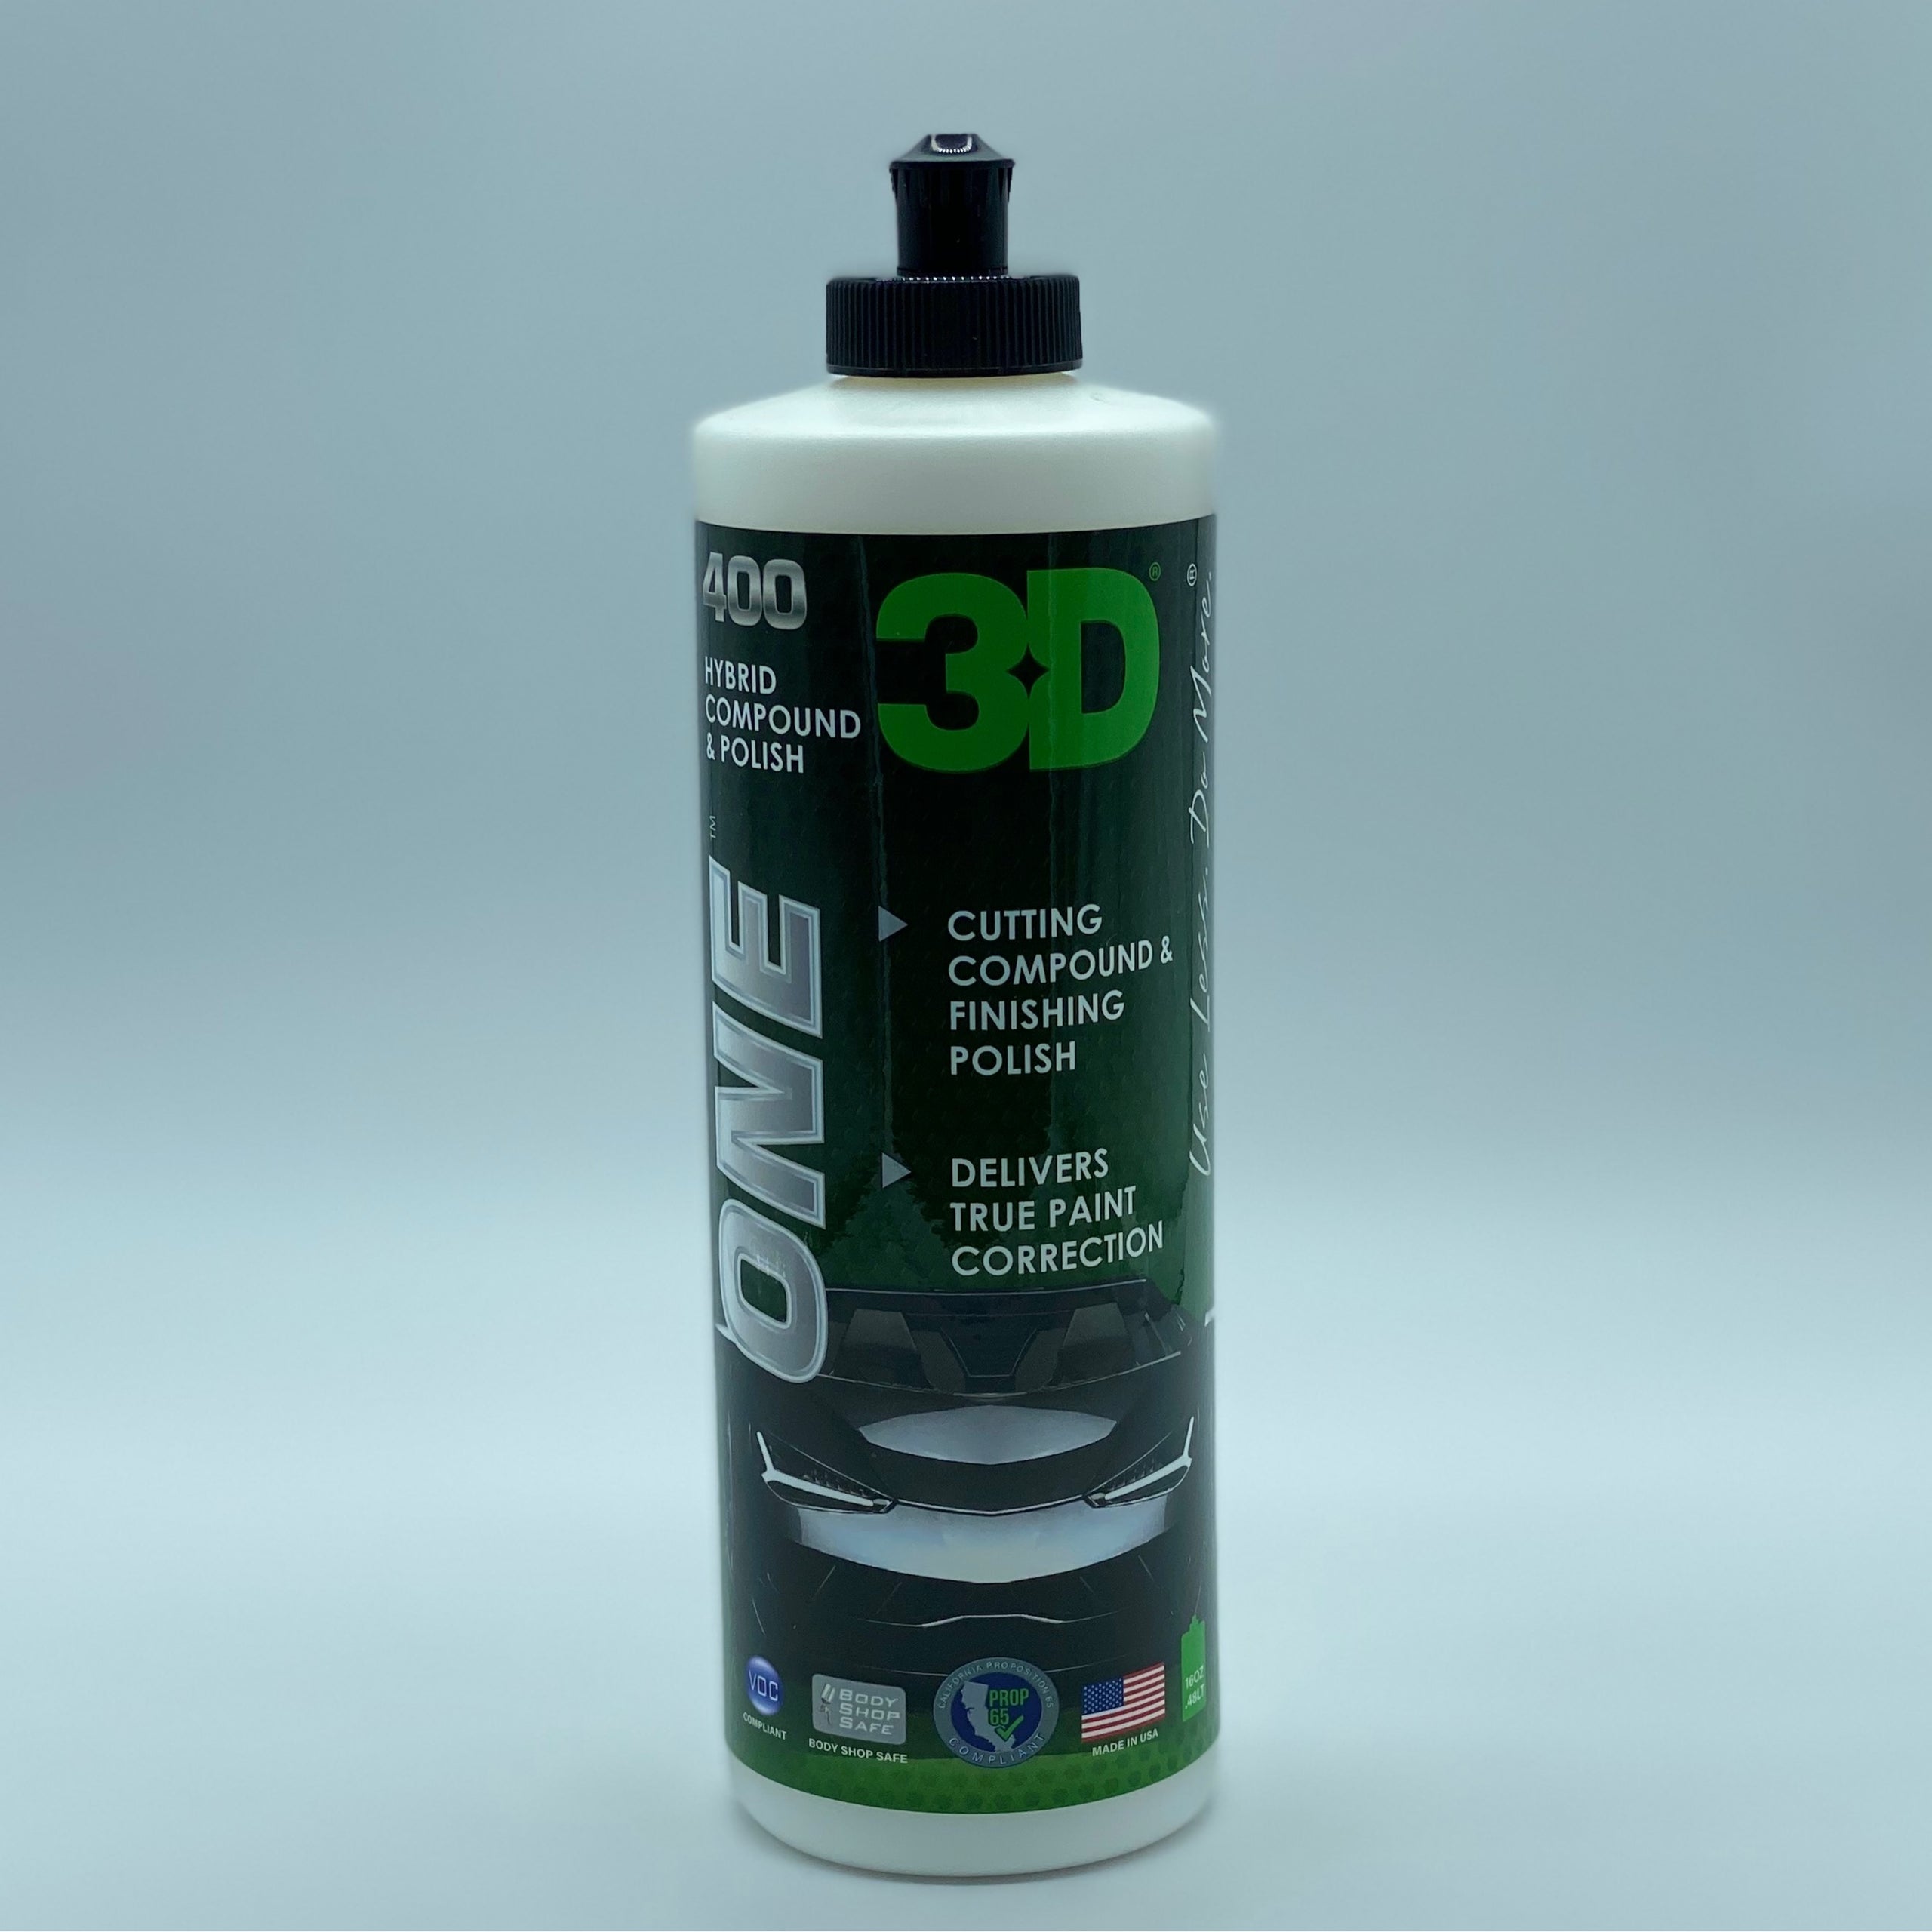 3D One (All In One Compound and Polish)